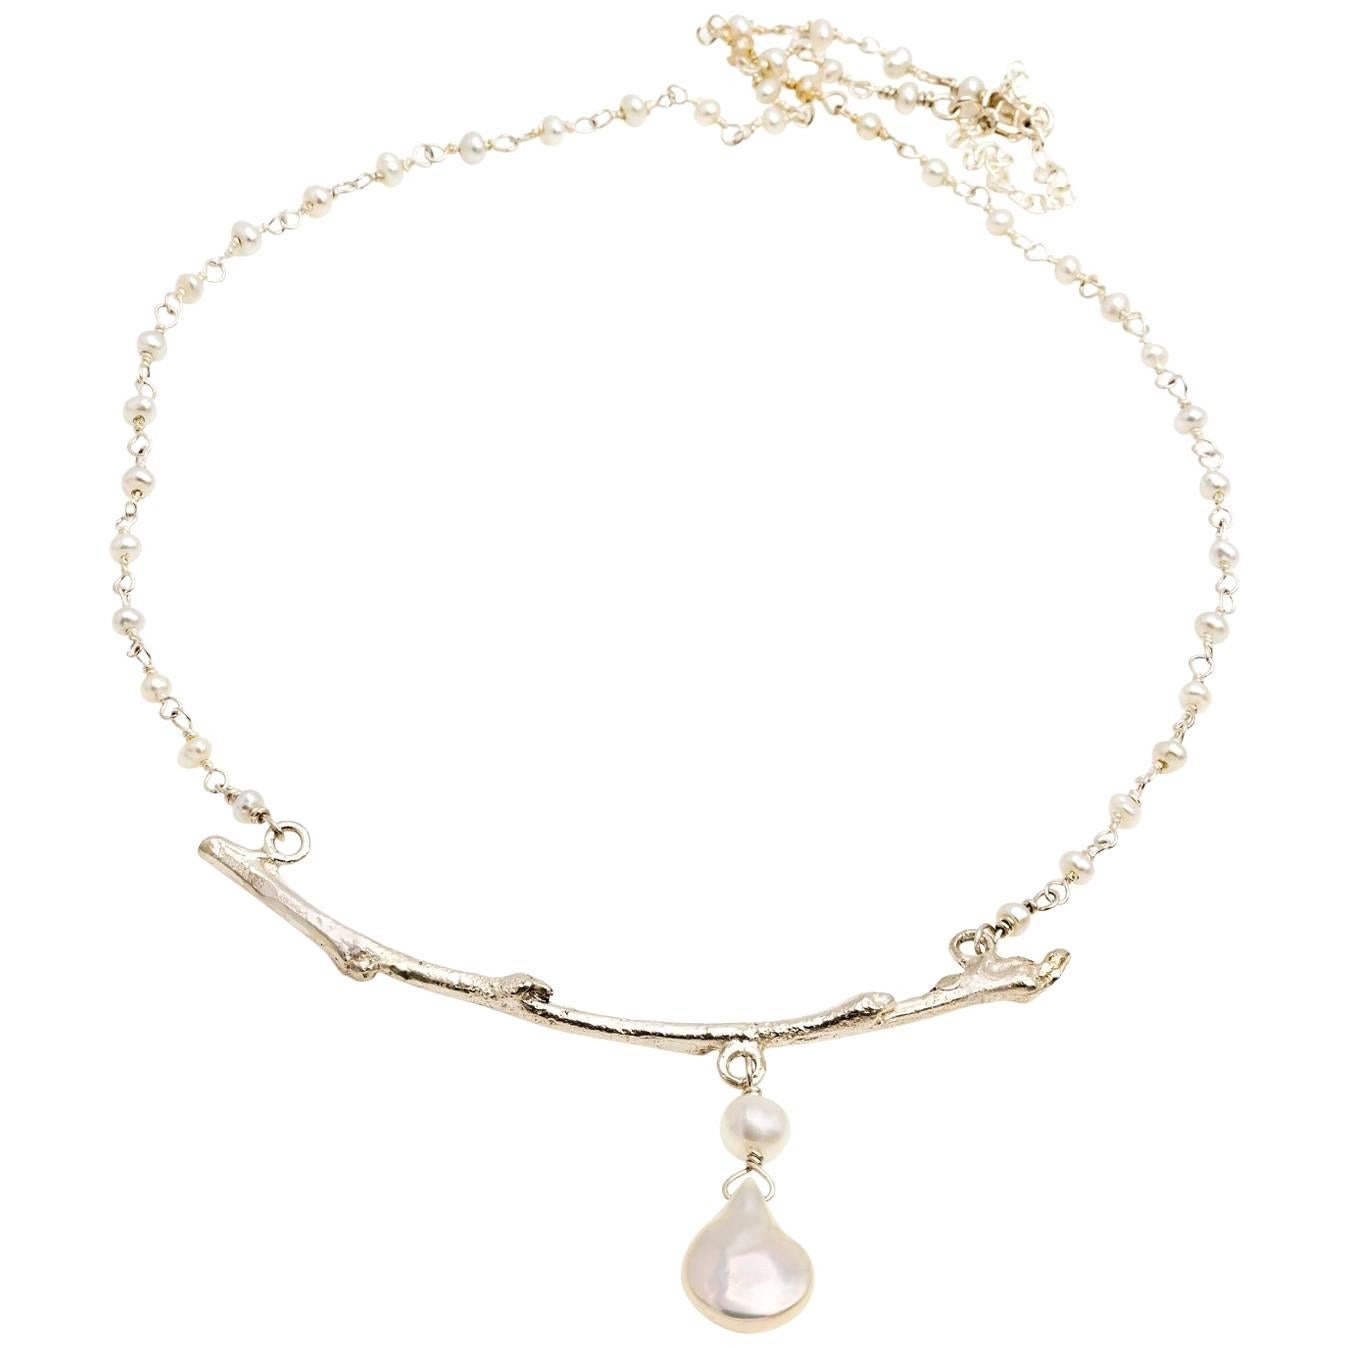 Silver Nature Branch and Pearl Necklace